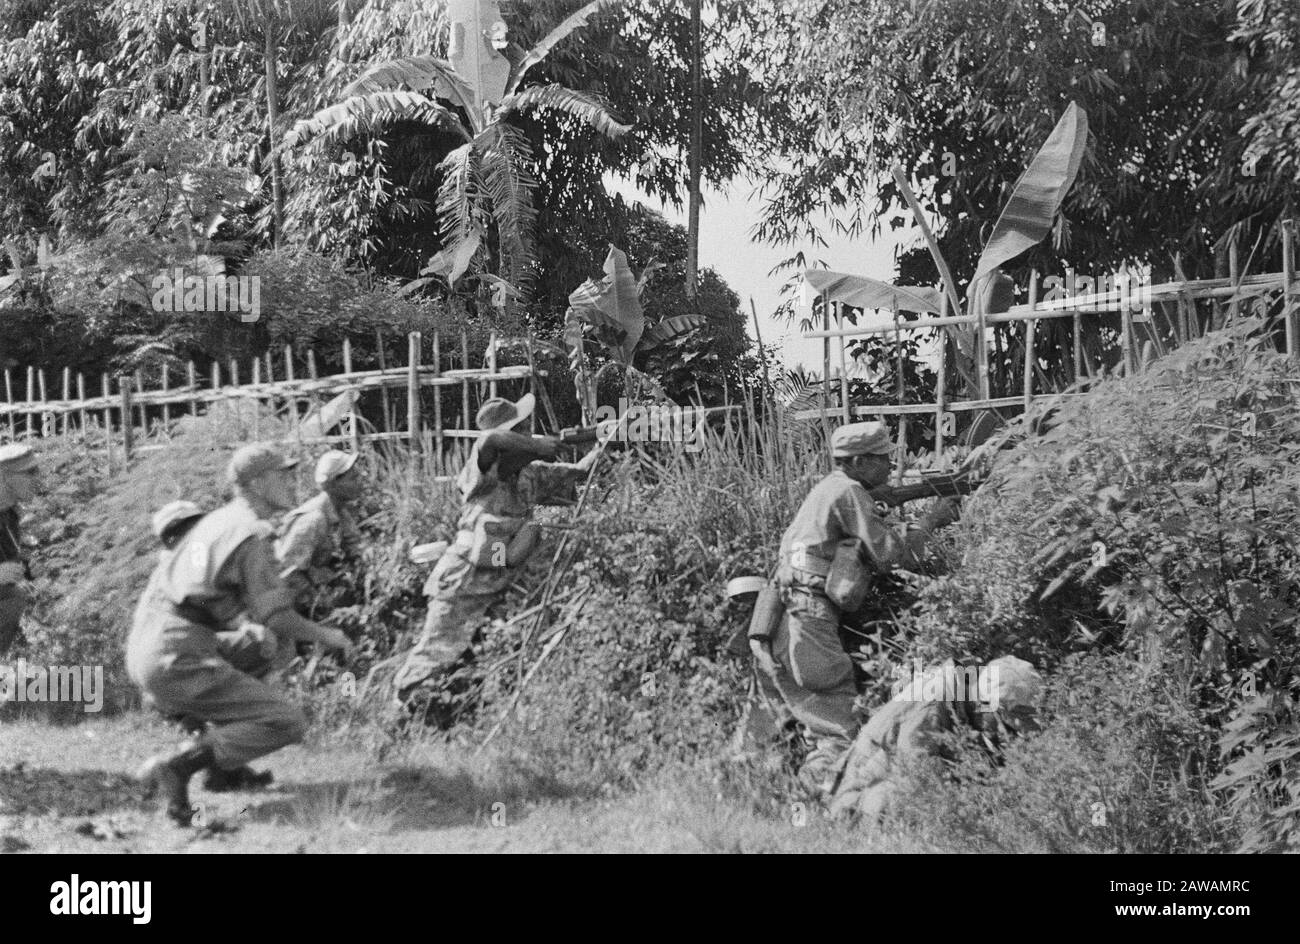 Photoreportage near Buitenzorg  Soldiers in battle position along the roadside Date: January 1947 Location: Bogor, Indonesia, Java, Dutch East Indies Stock Photo